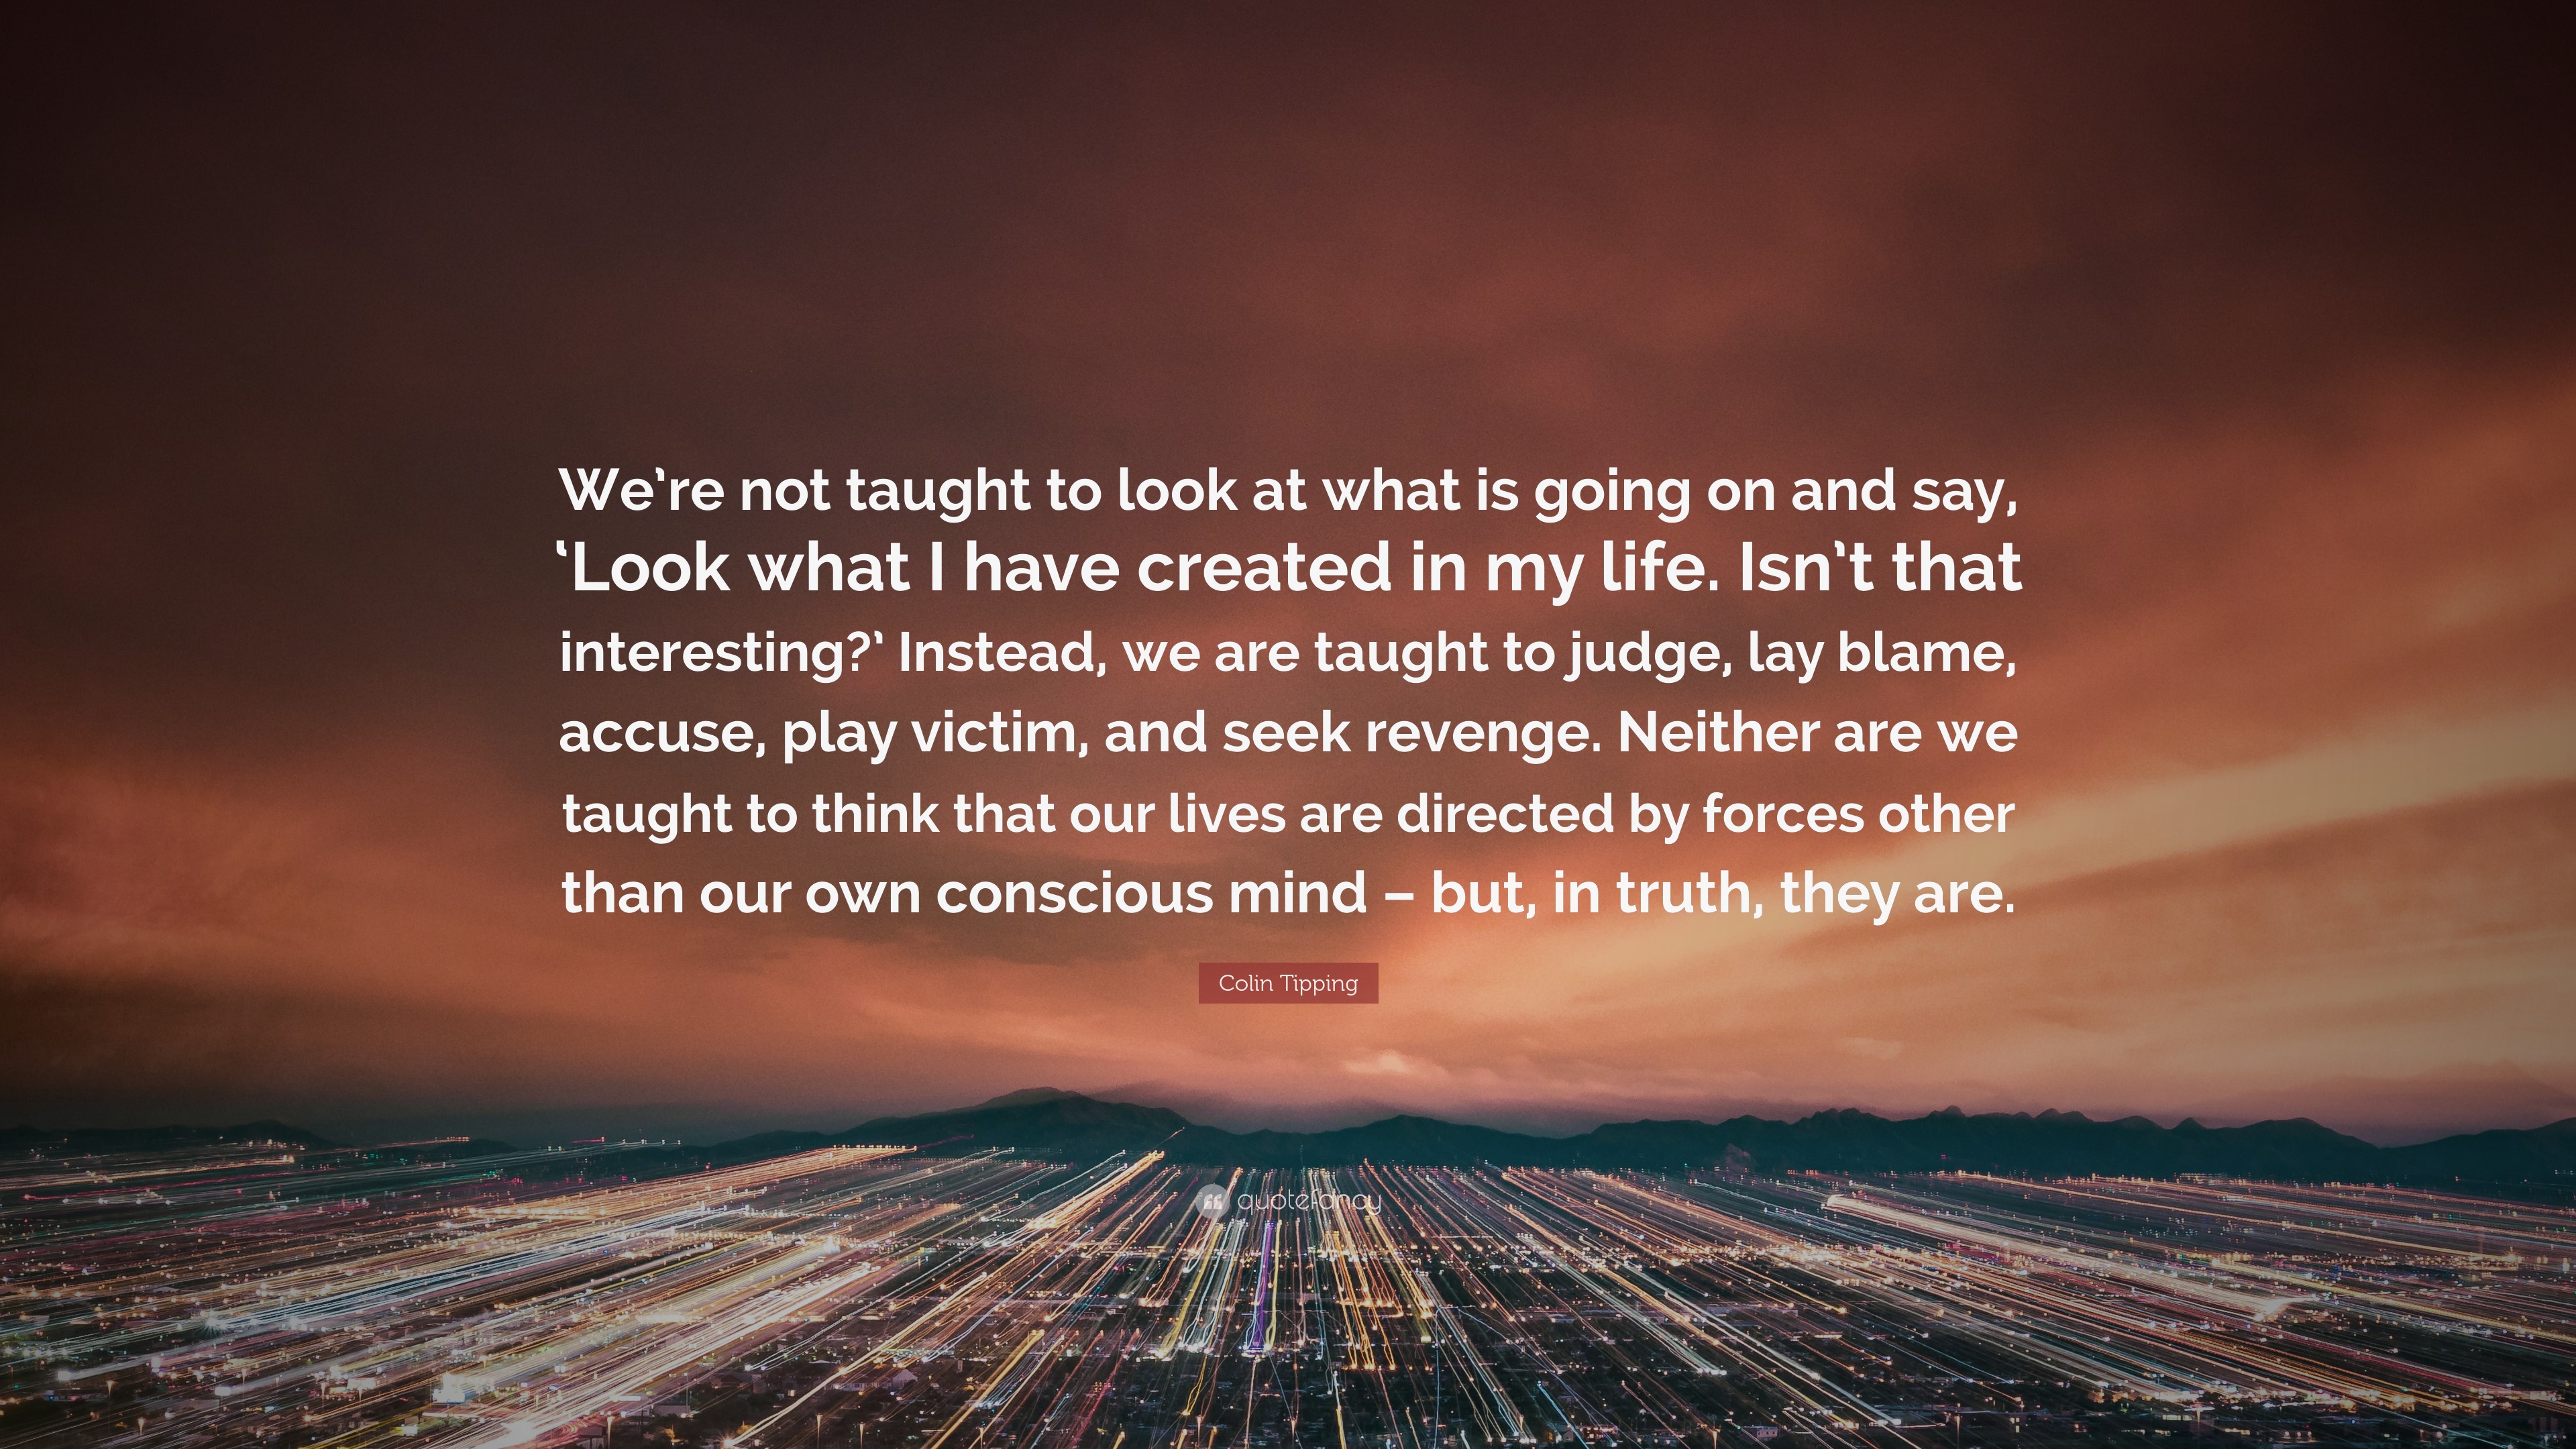 Colin Tipping Quote: “We’re not taught to look at what is going on and ...